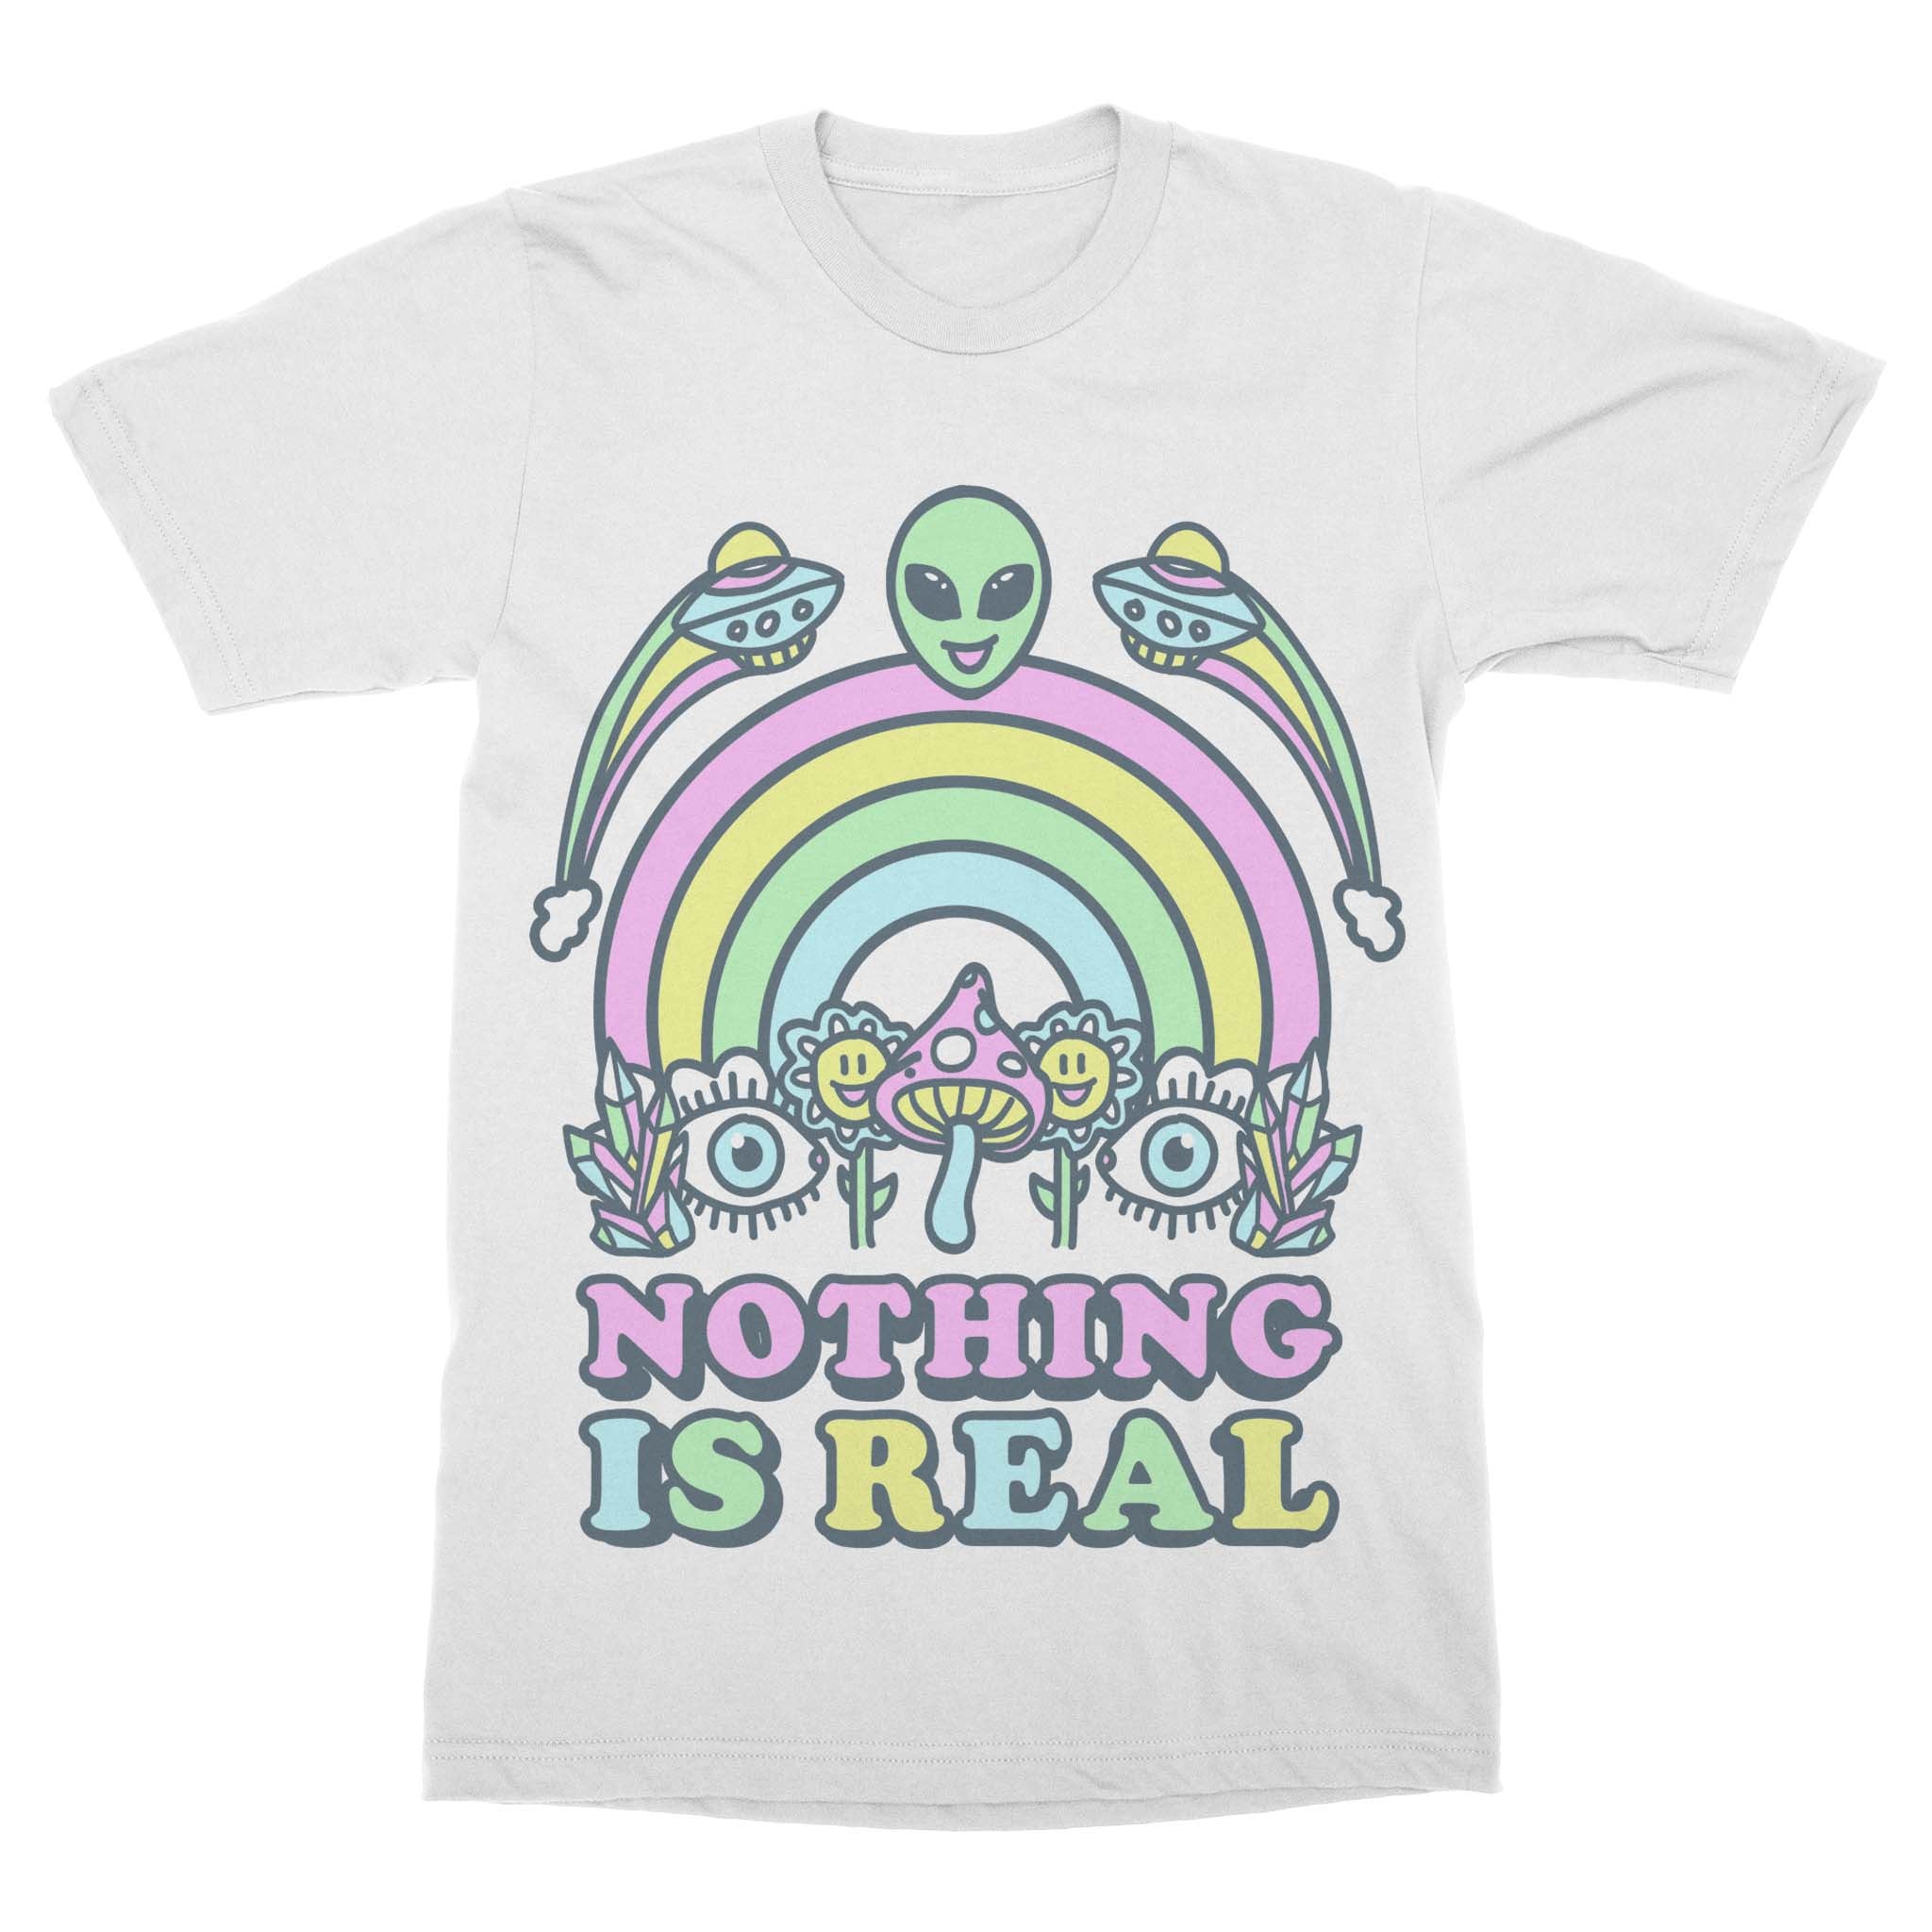 Nothing Is Real - Cloud White Shirt